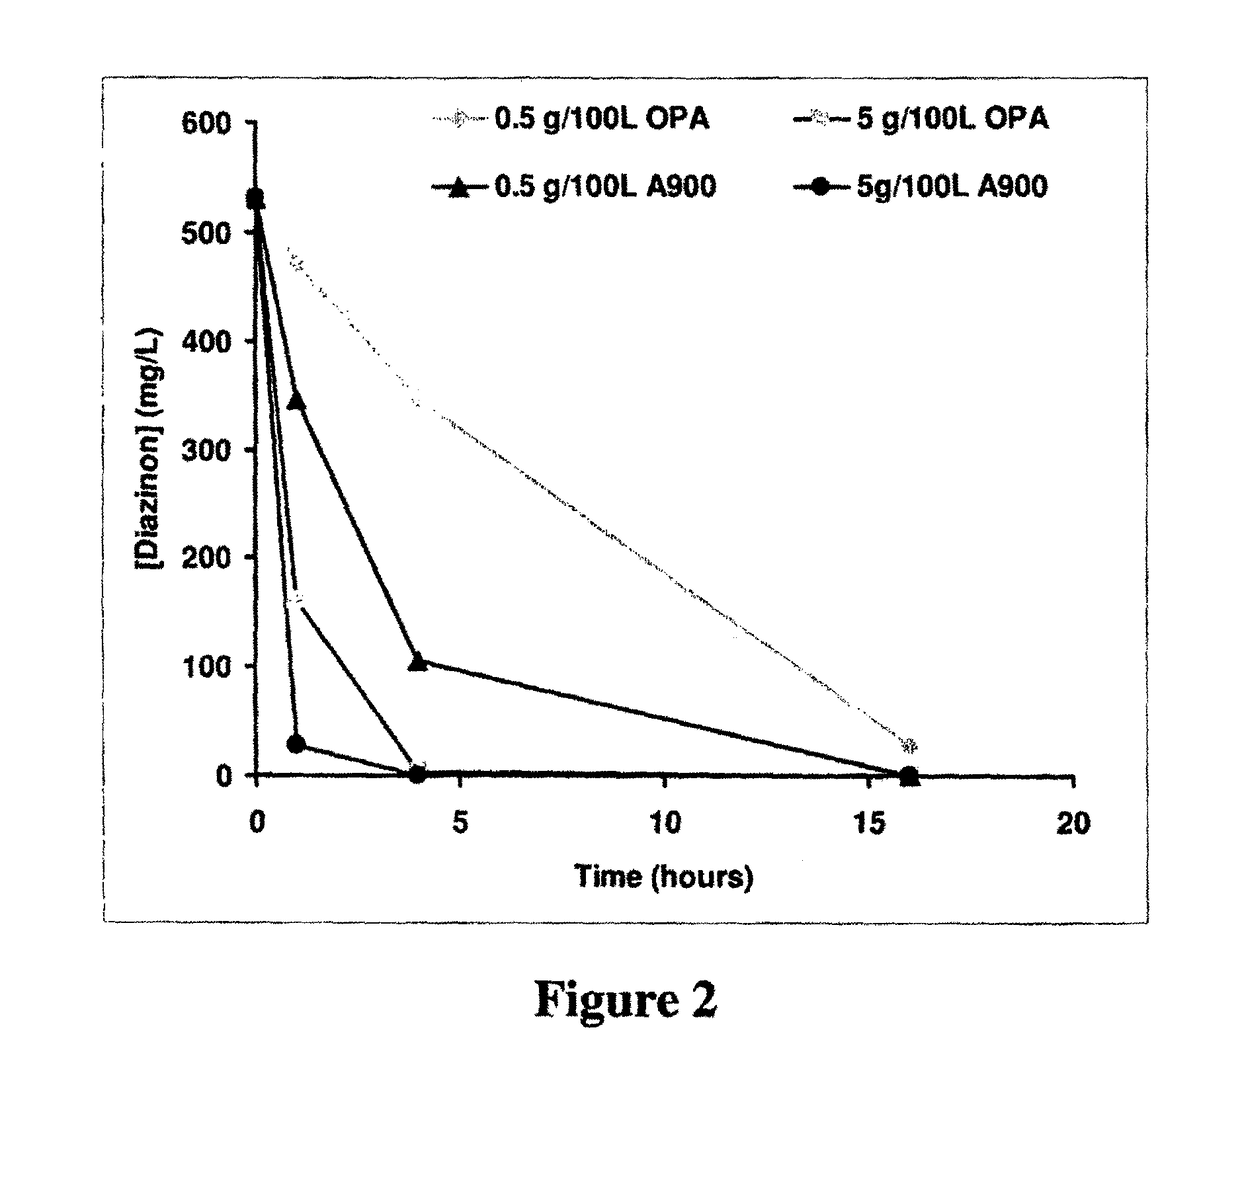 Enzymes for degrading organophosphates